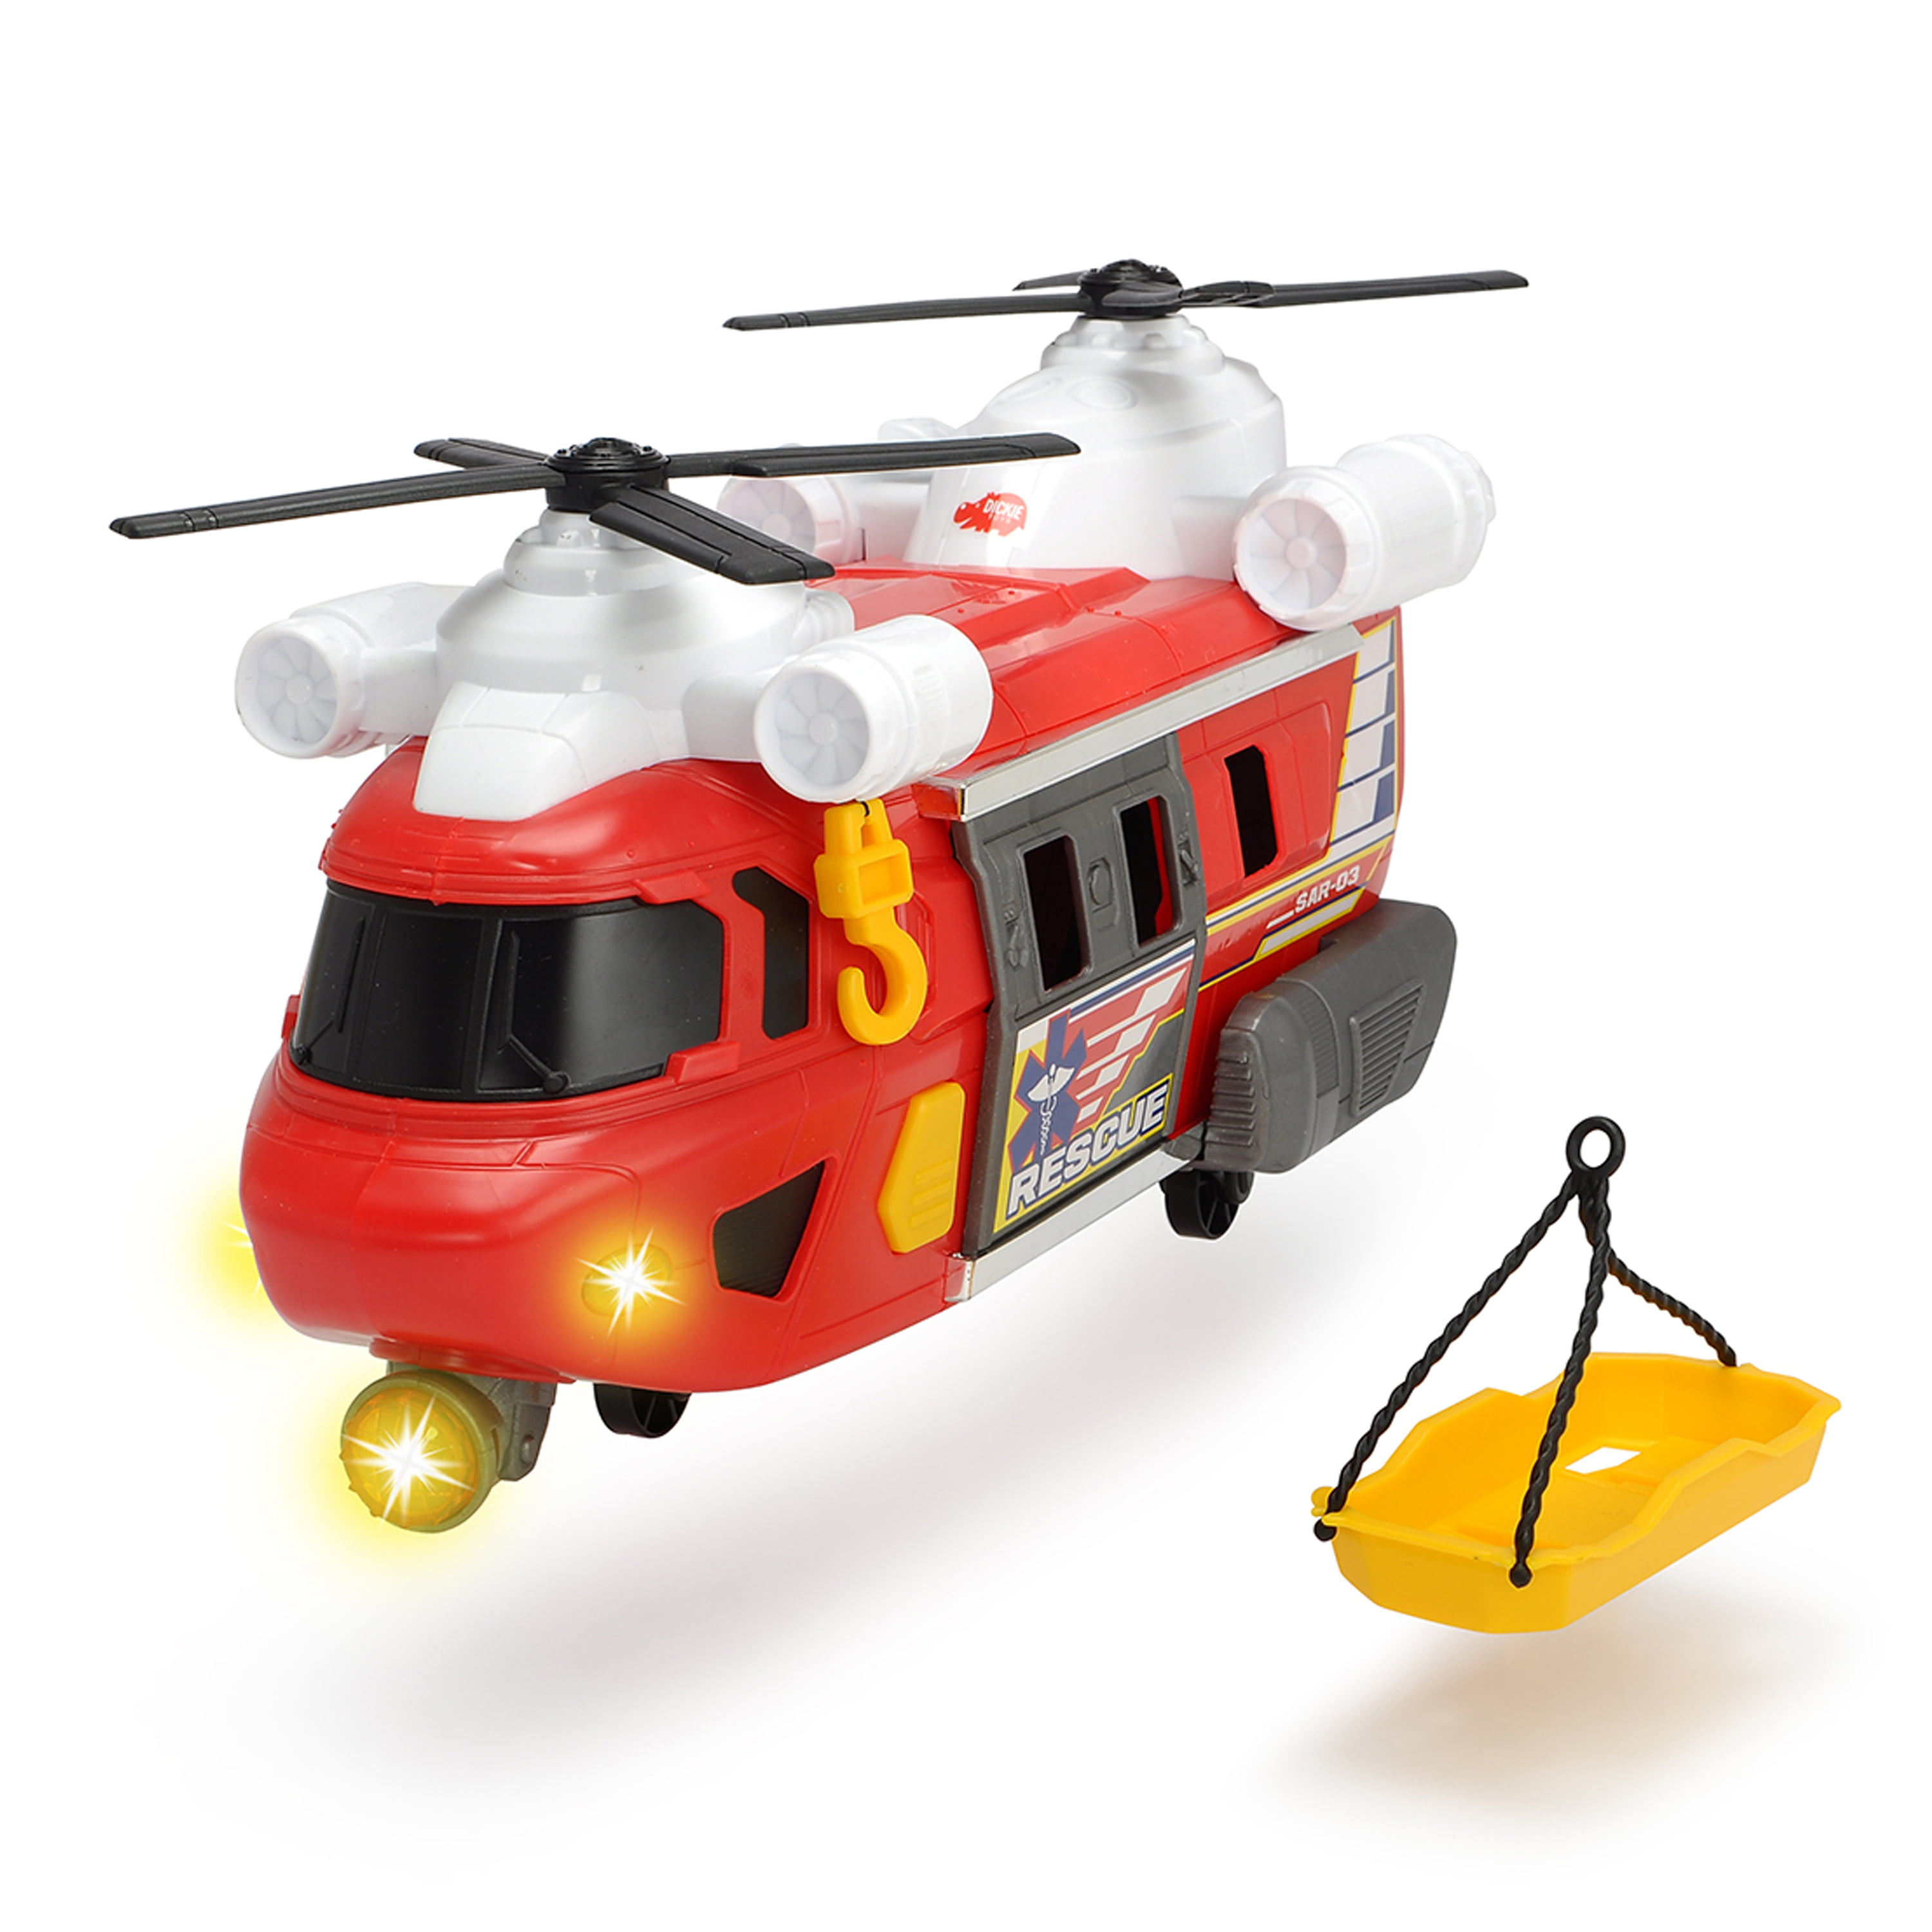 Dickie Toys 203302003 Action Series Rescue Copter Rettungshelikopter 